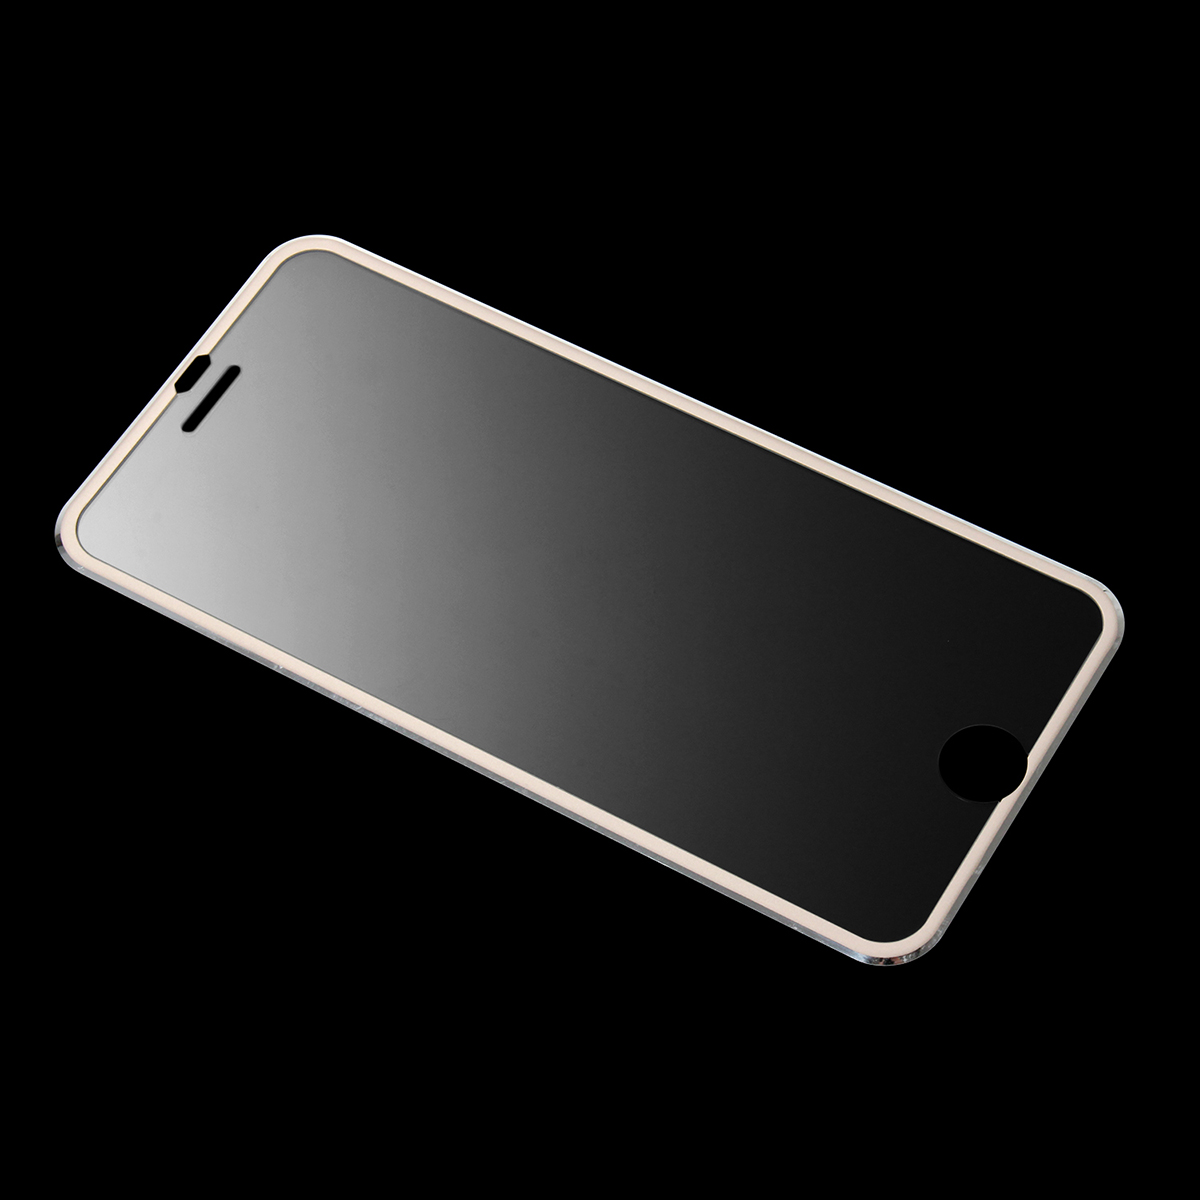 3D Tempered Glass Screen Protector Film with Curved Edge for iPhone 6/6s Plus - Gold